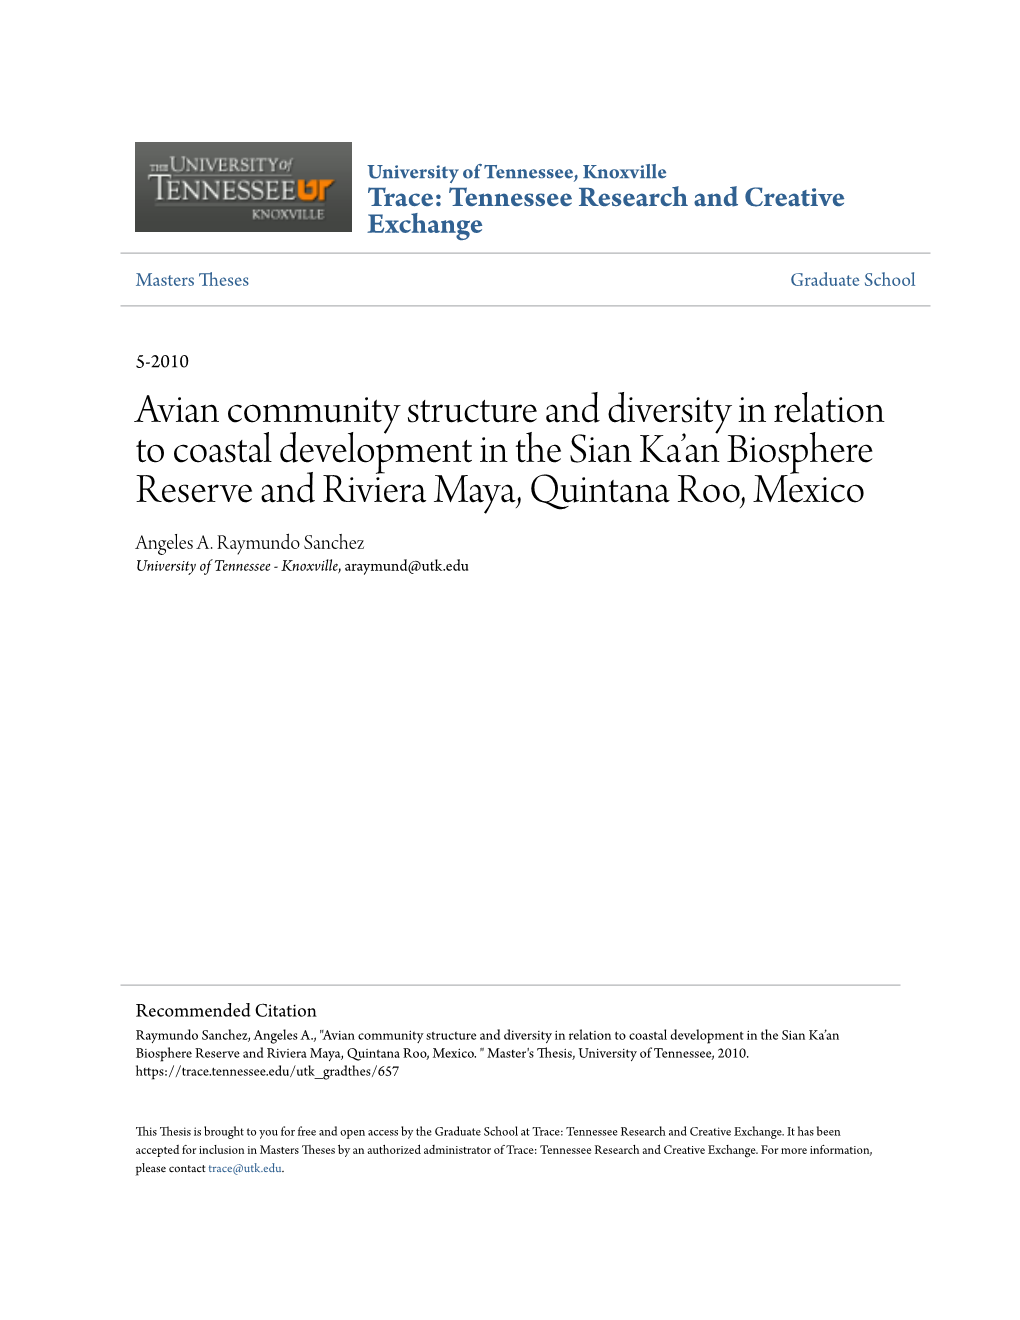 Avian Community Structure and Diversity in Relation to Coastal Development in the Sian Ka’An Biosphere Reserve and Riviera Maya, Quintana Roo, Mexico Angeles A